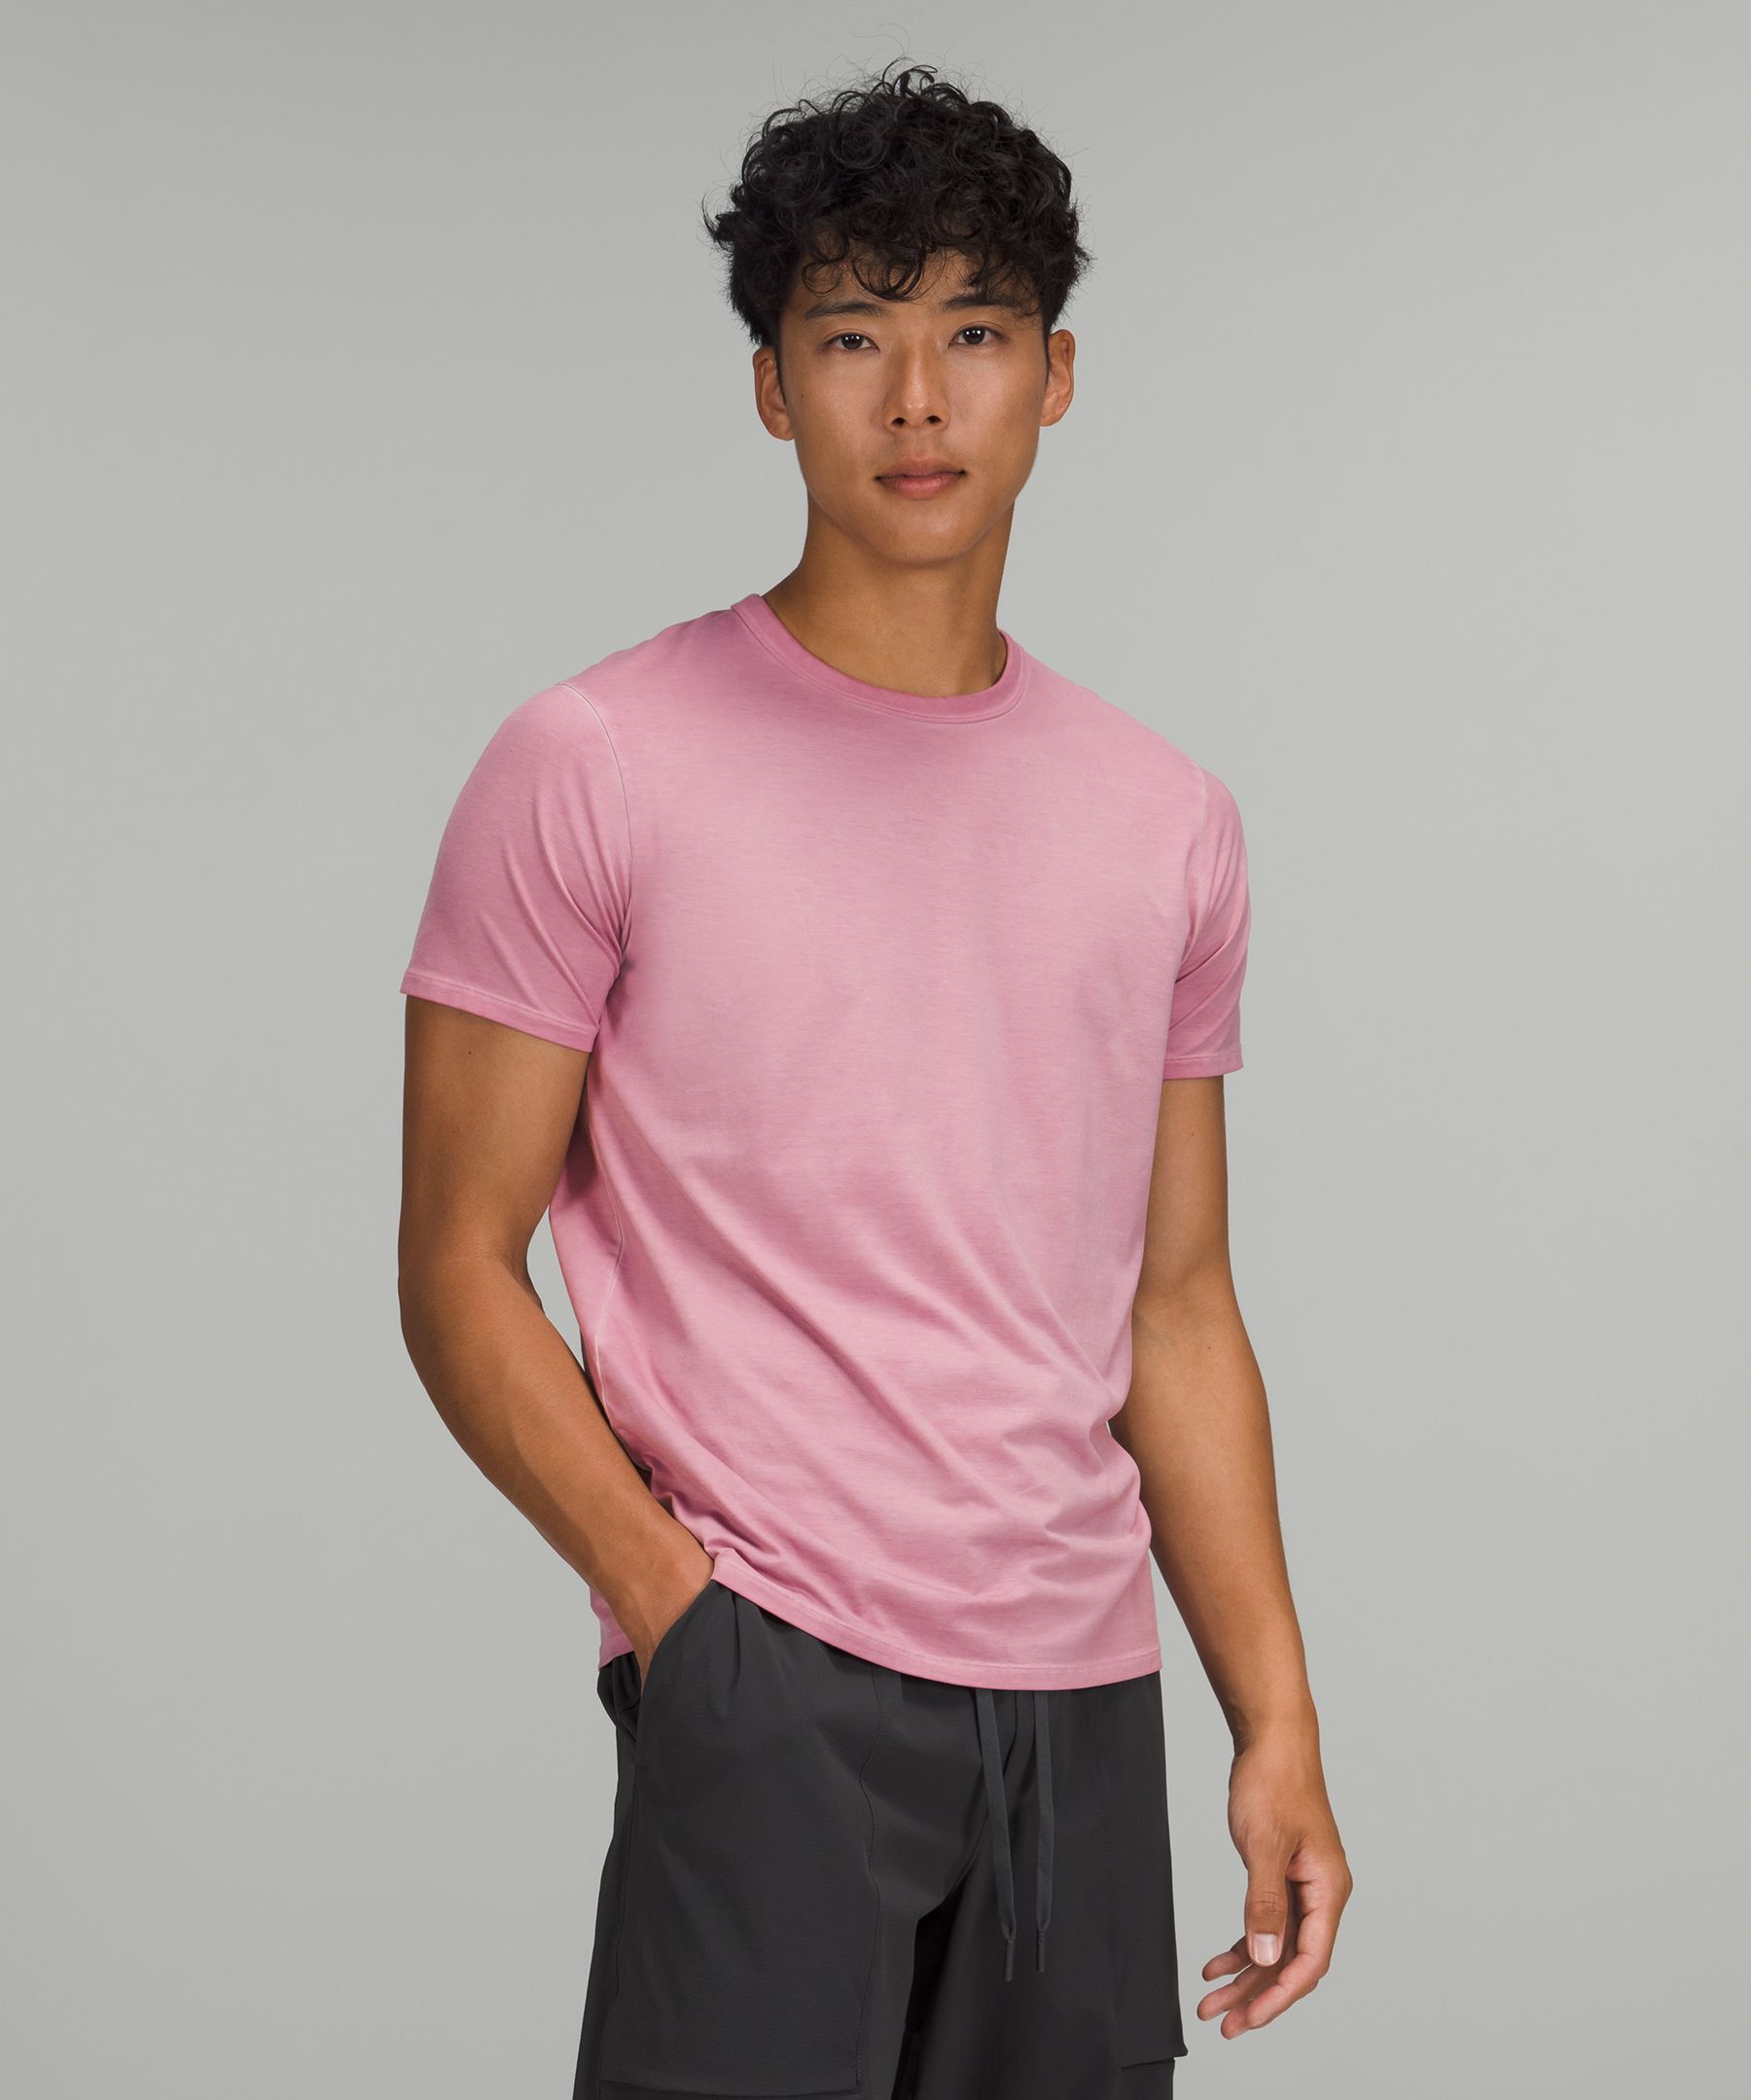 Lululemon The Fundamental T-shirt In Breeze Dye Pink Taupe